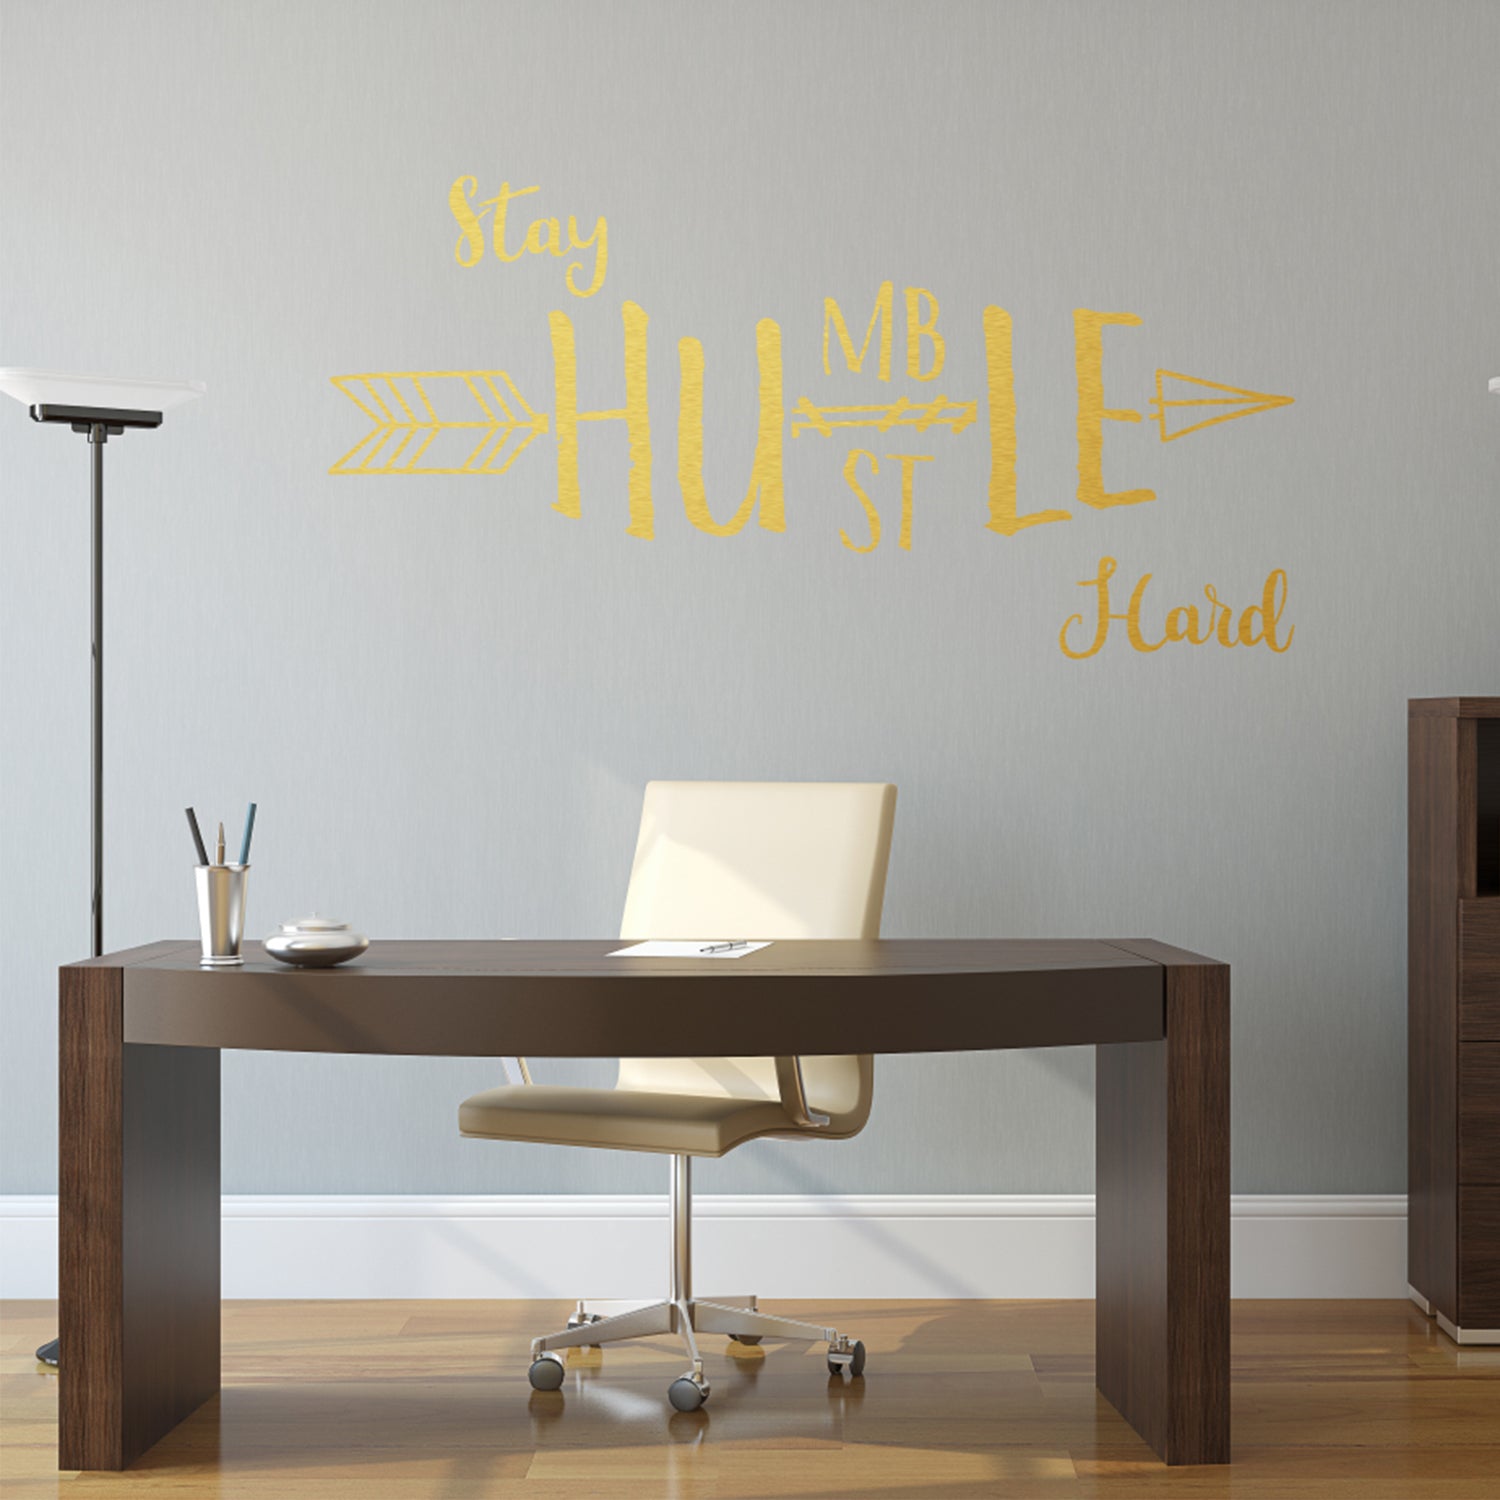 Stay humble hustle hard | Wall quote-Wall quote-Adnil Creations